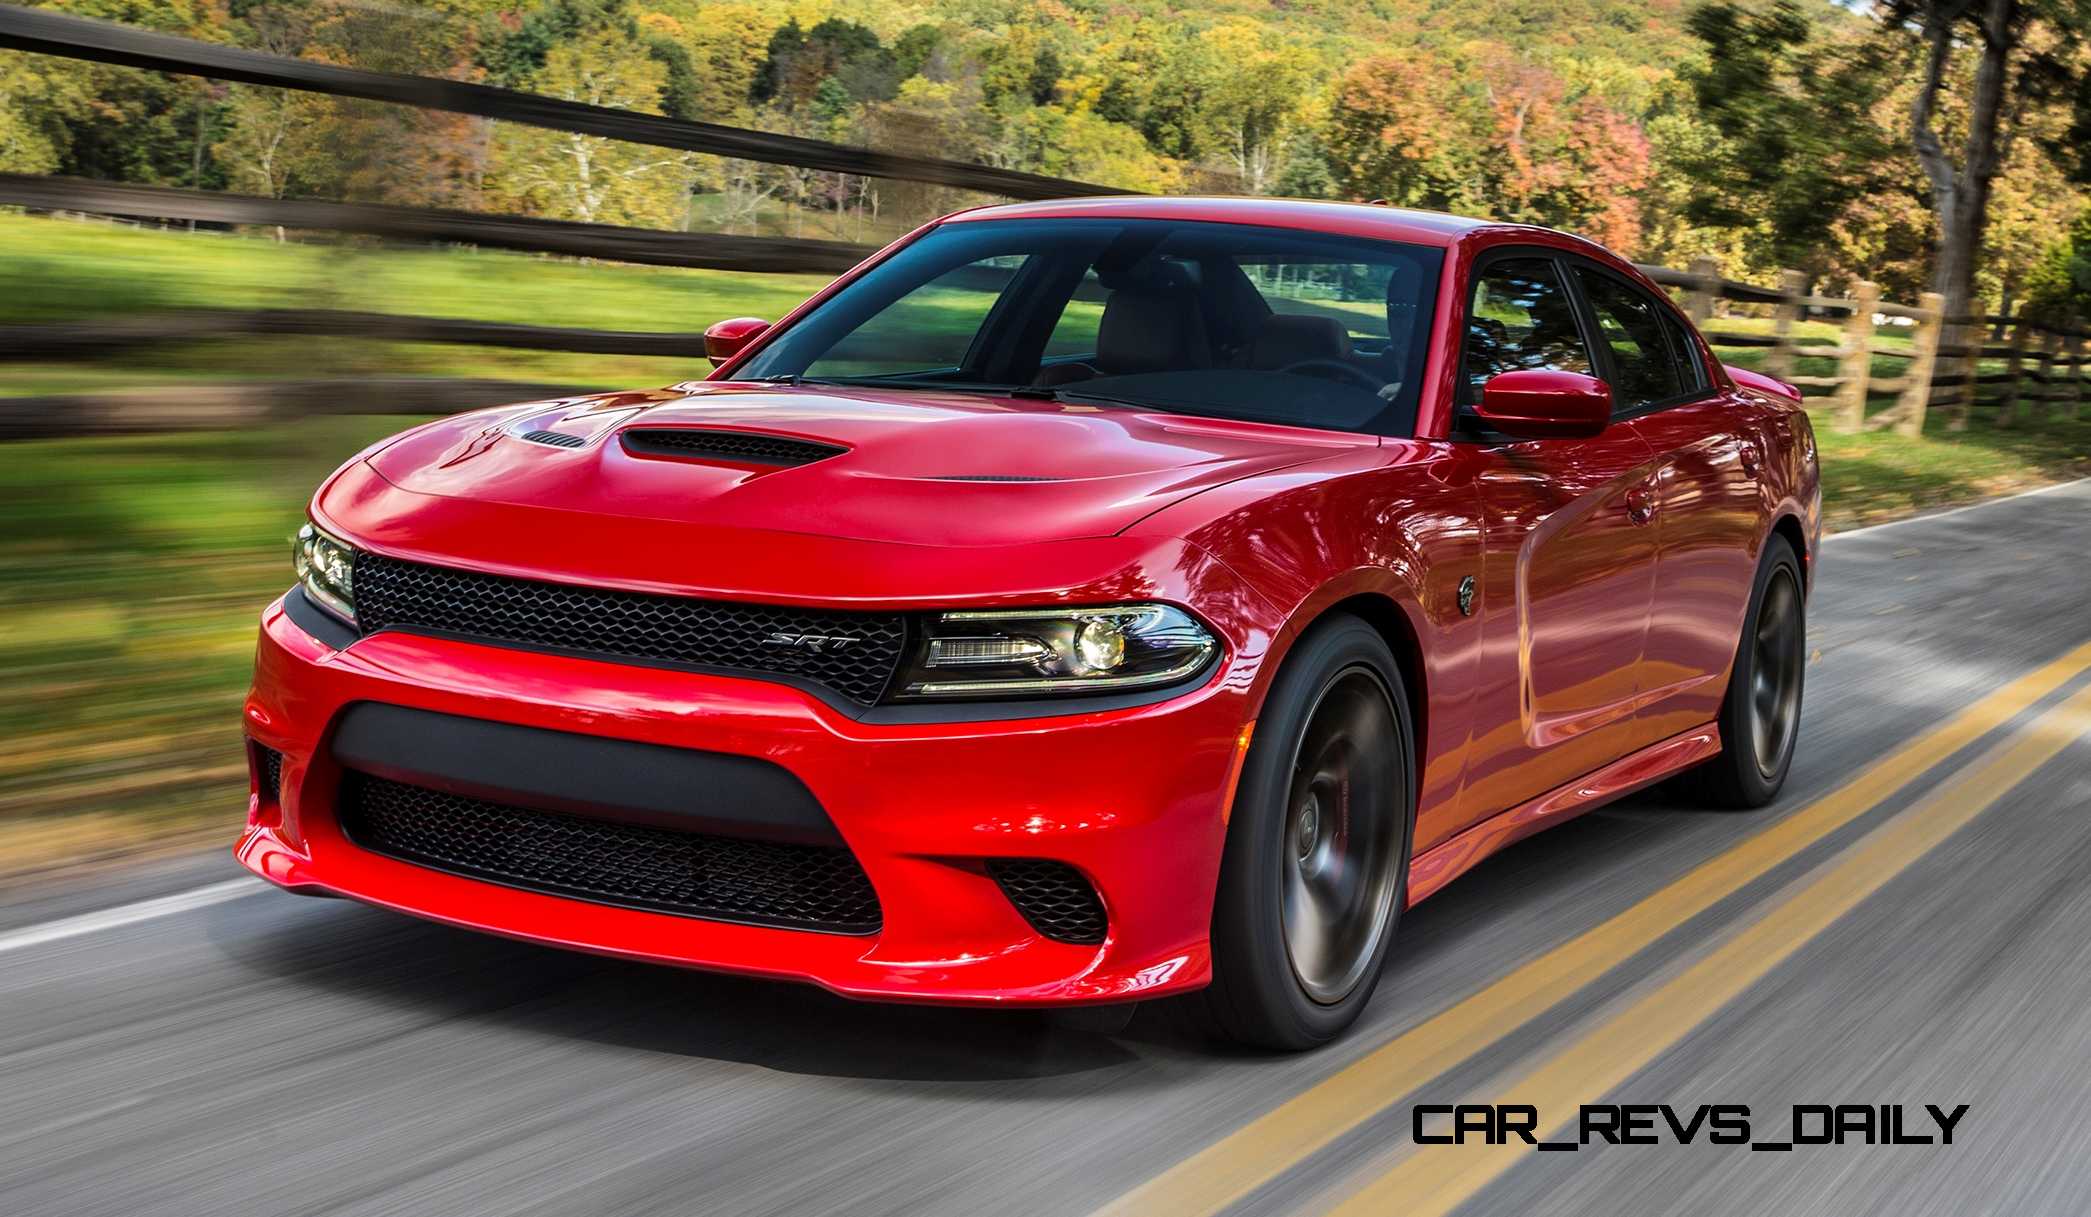 3.7s 2015 Dodge Charger SRT Hellcat in 60 New High-Res Photos!